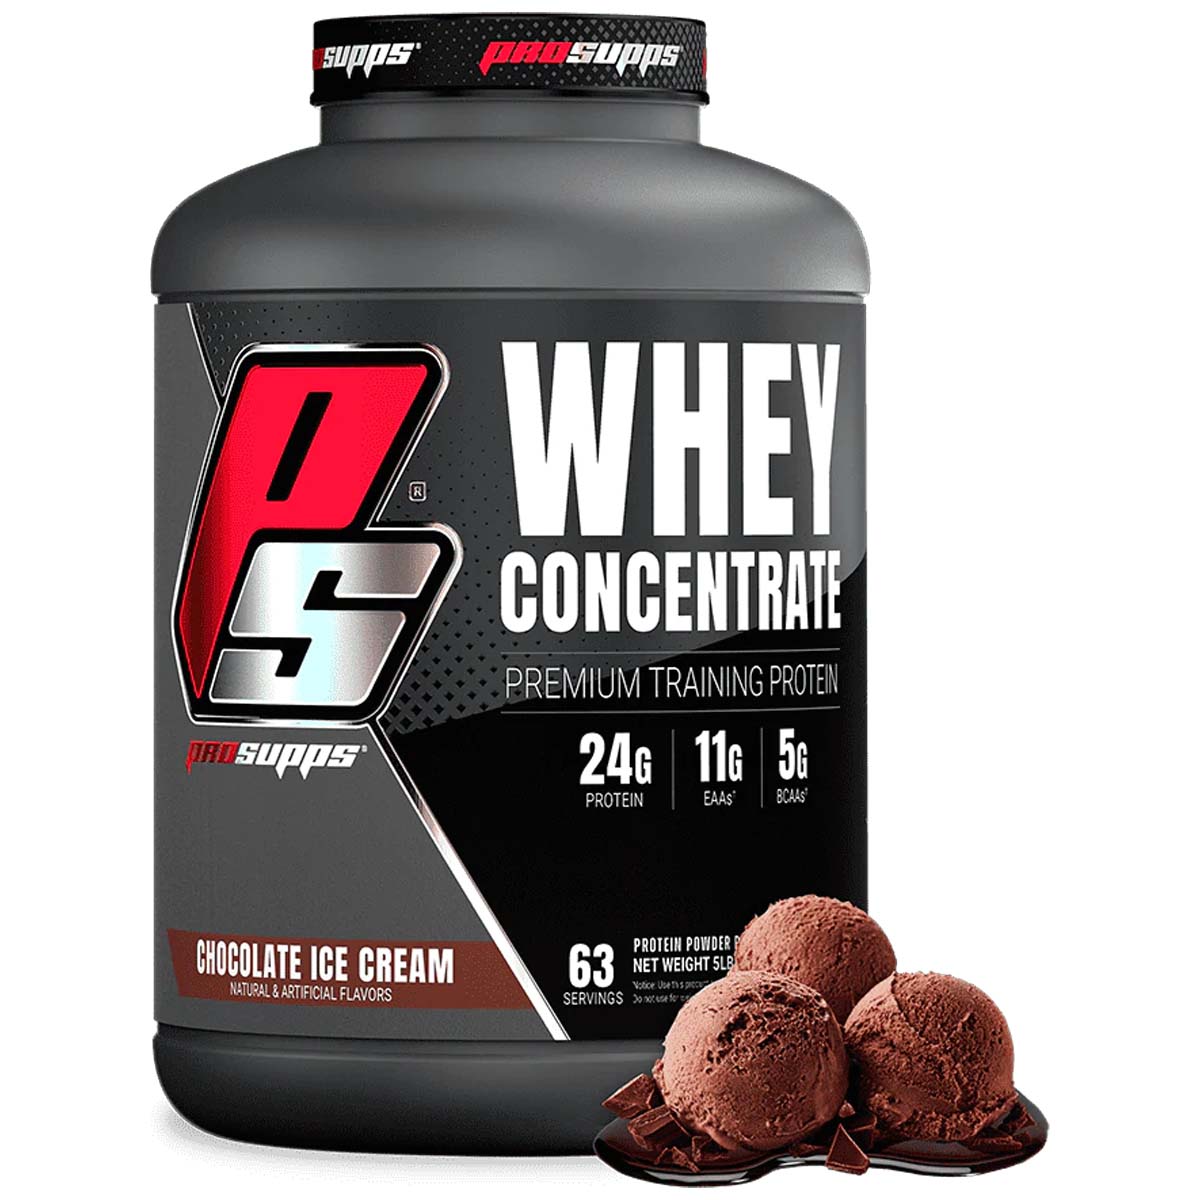 Pro Supps Whey Concentrate 5 LB Chocolate Ice Cream